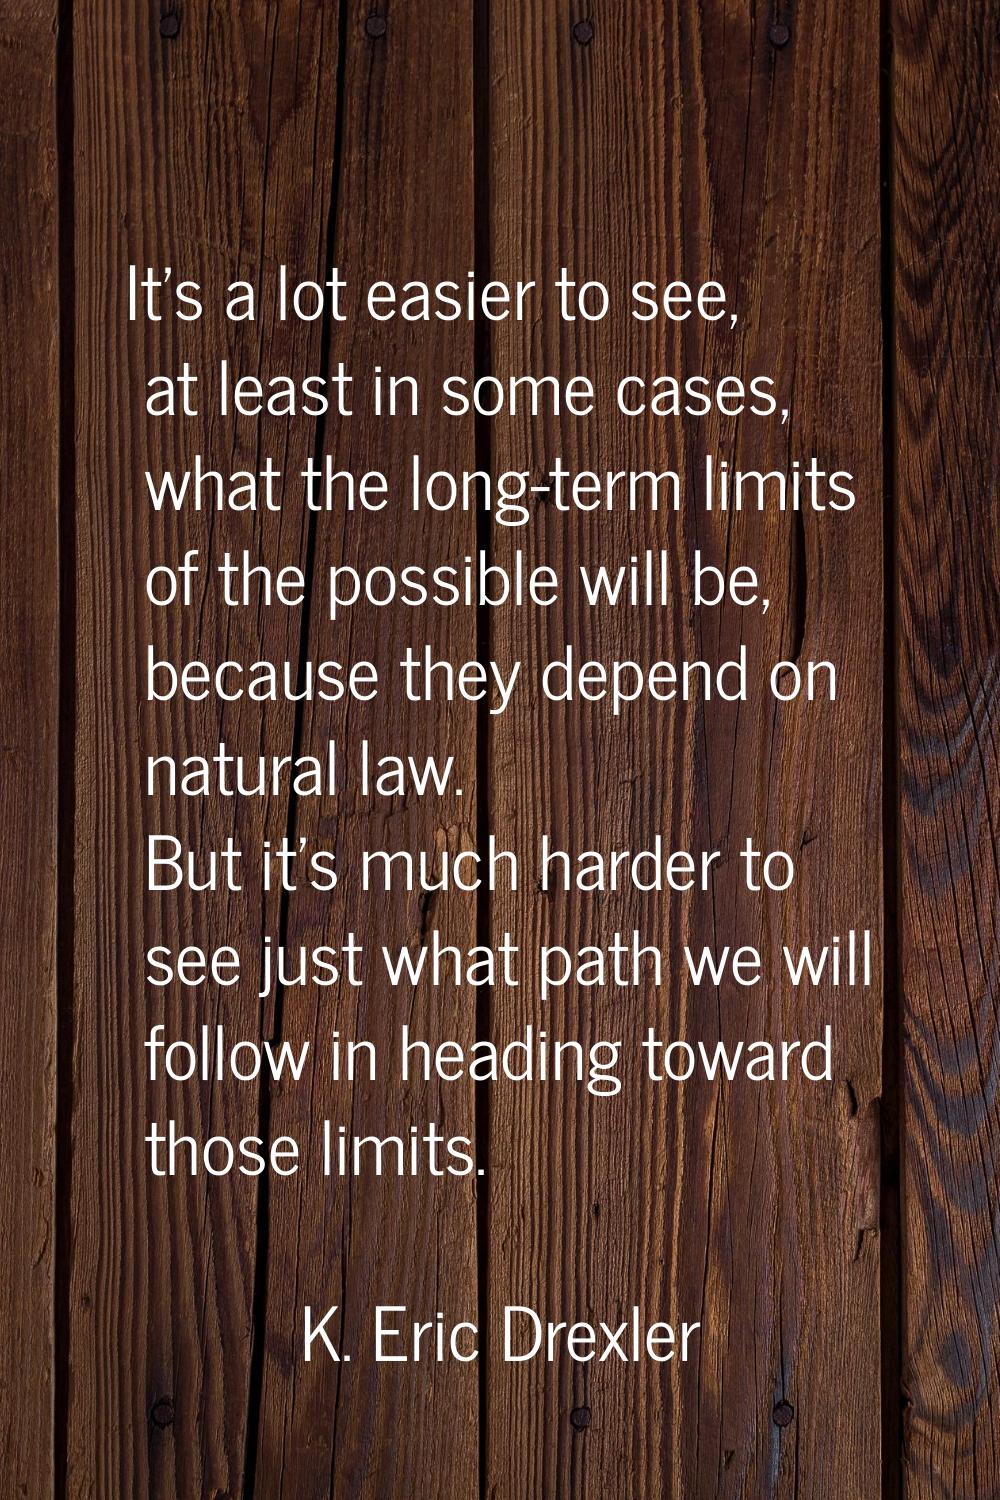 It's a lot easier to see, at least in some cases, what the long-term limits of the possible will be